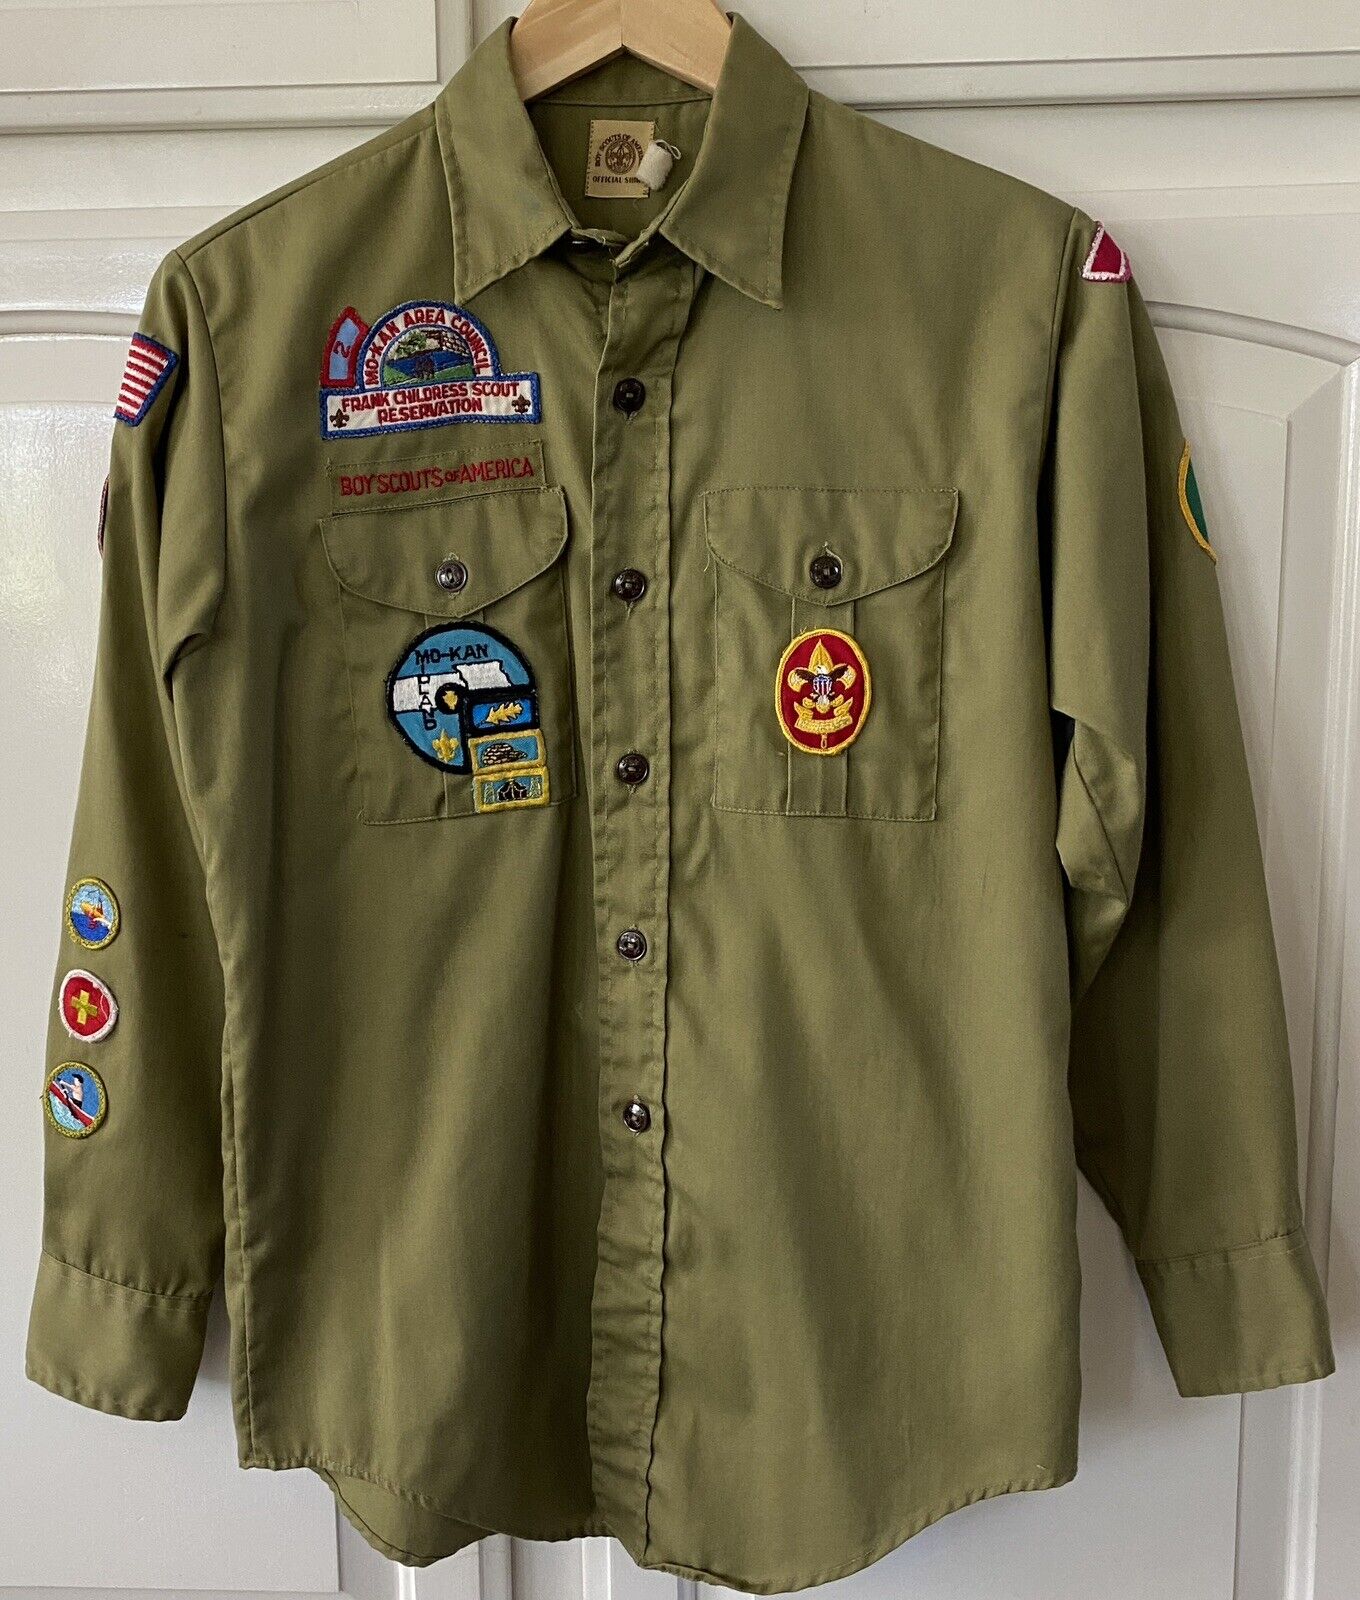 Boy Scouts of America Youth Long Sleeve Official Uniform Shirt w/ Sewn Patches